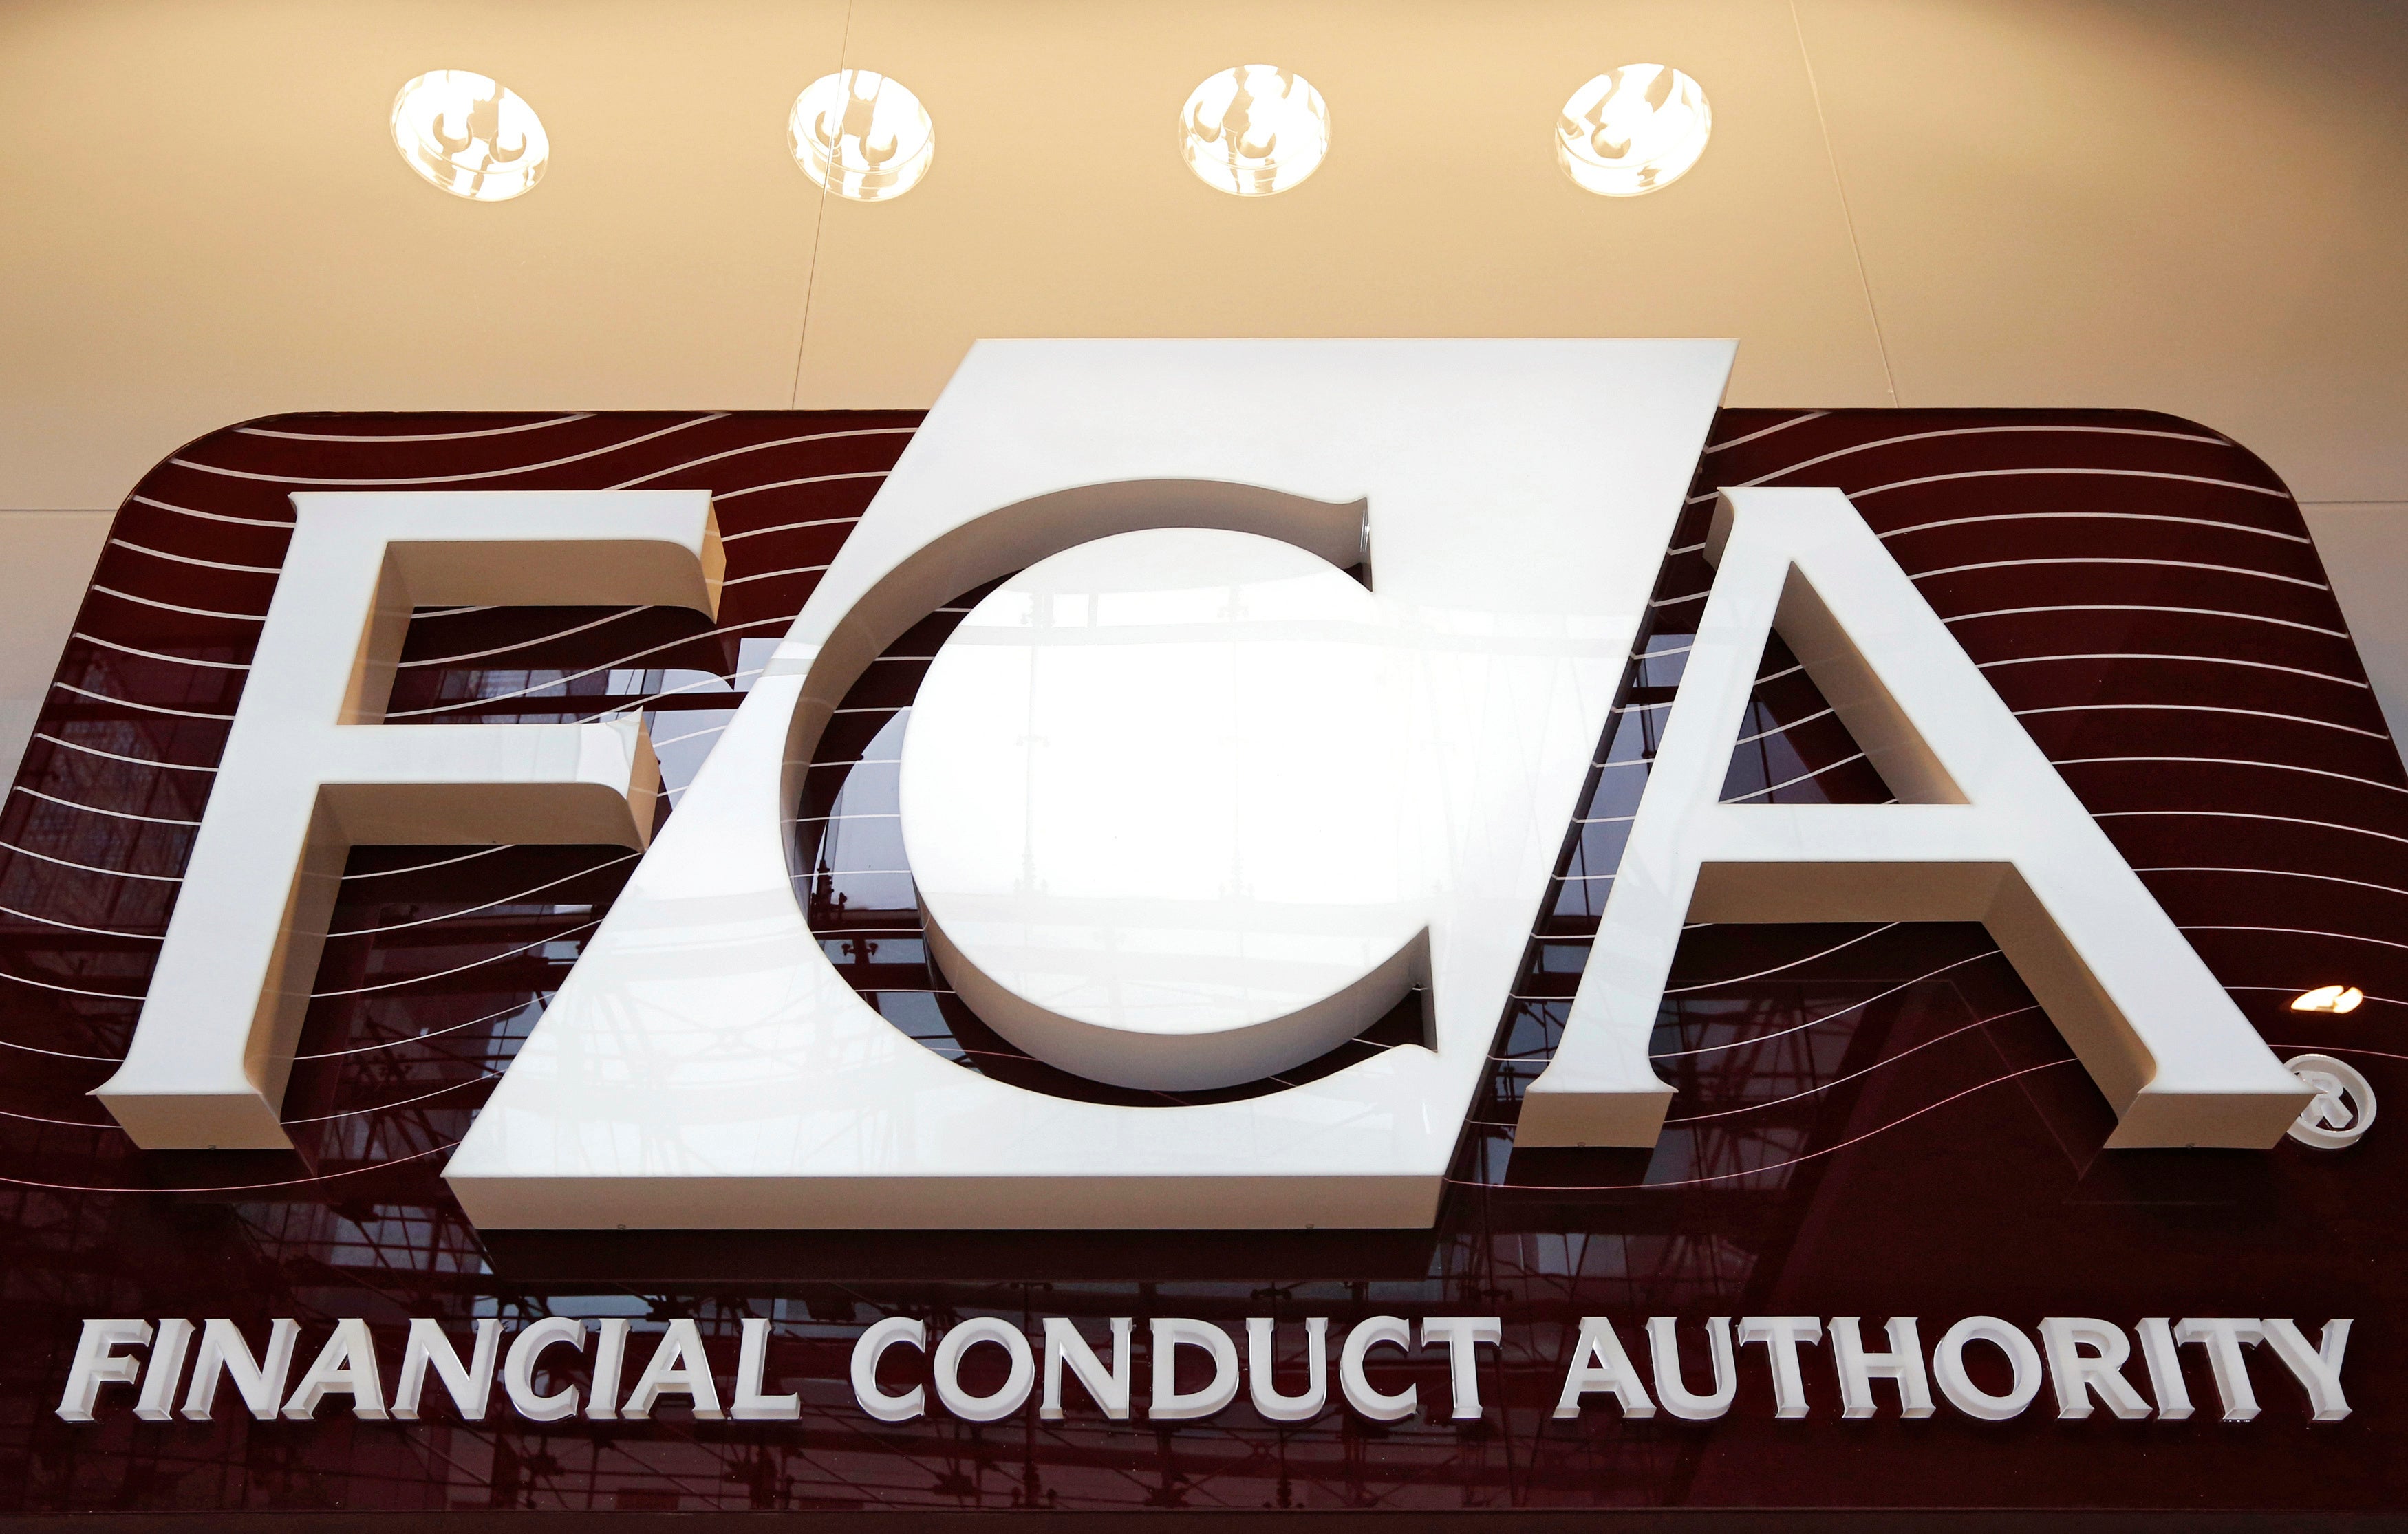 The FCA has claimed that LCF's products were not regulated but investors disagree